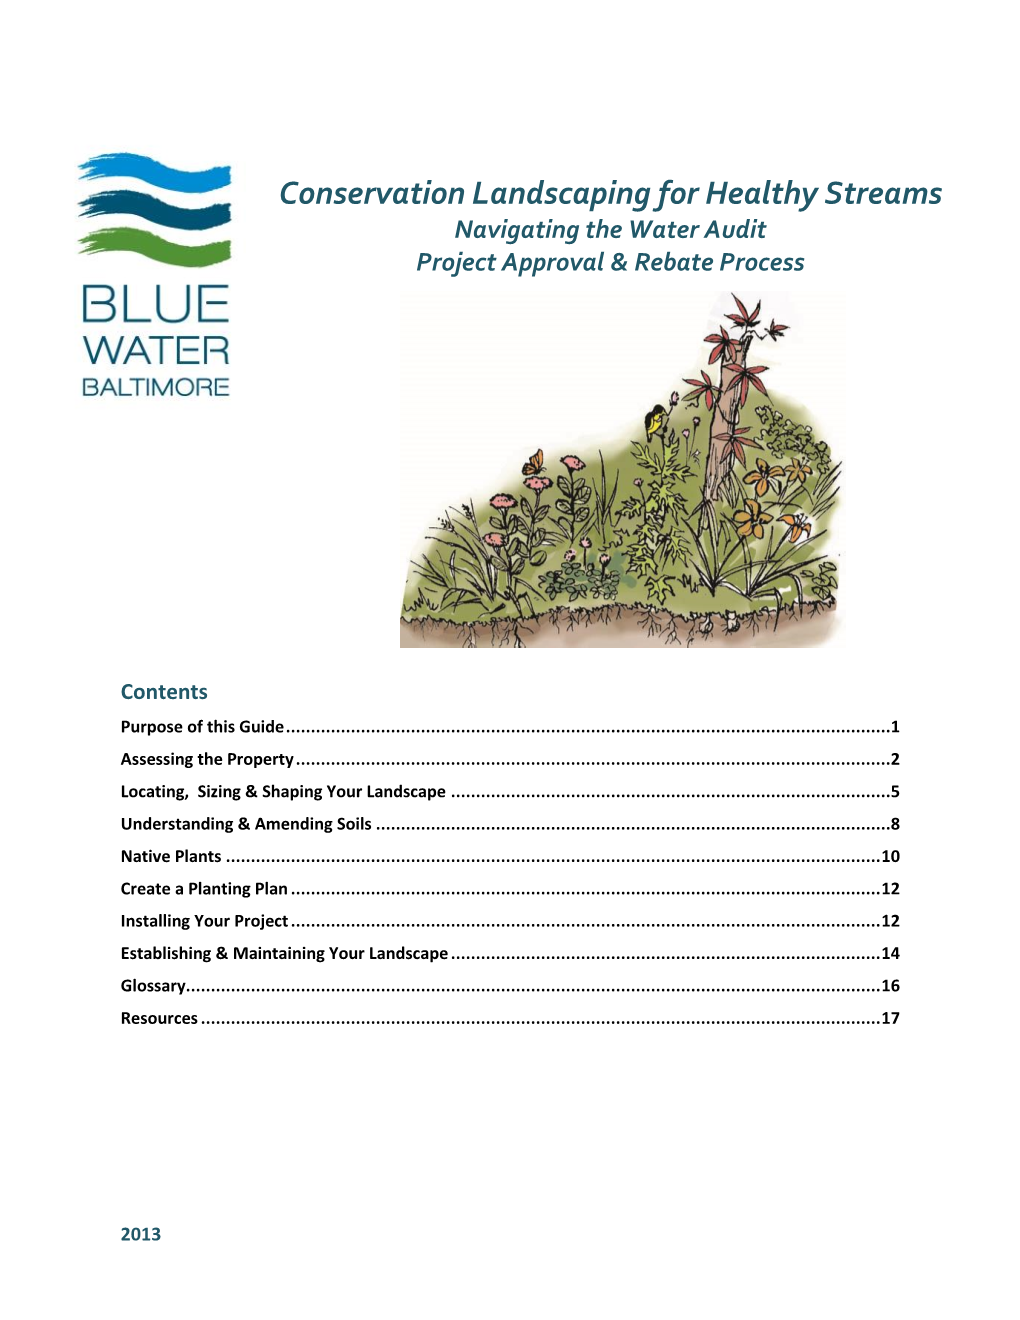 Conservation Landscaping for Healthy Streams Navigating the Water Audit Project Approval & Rebate Process